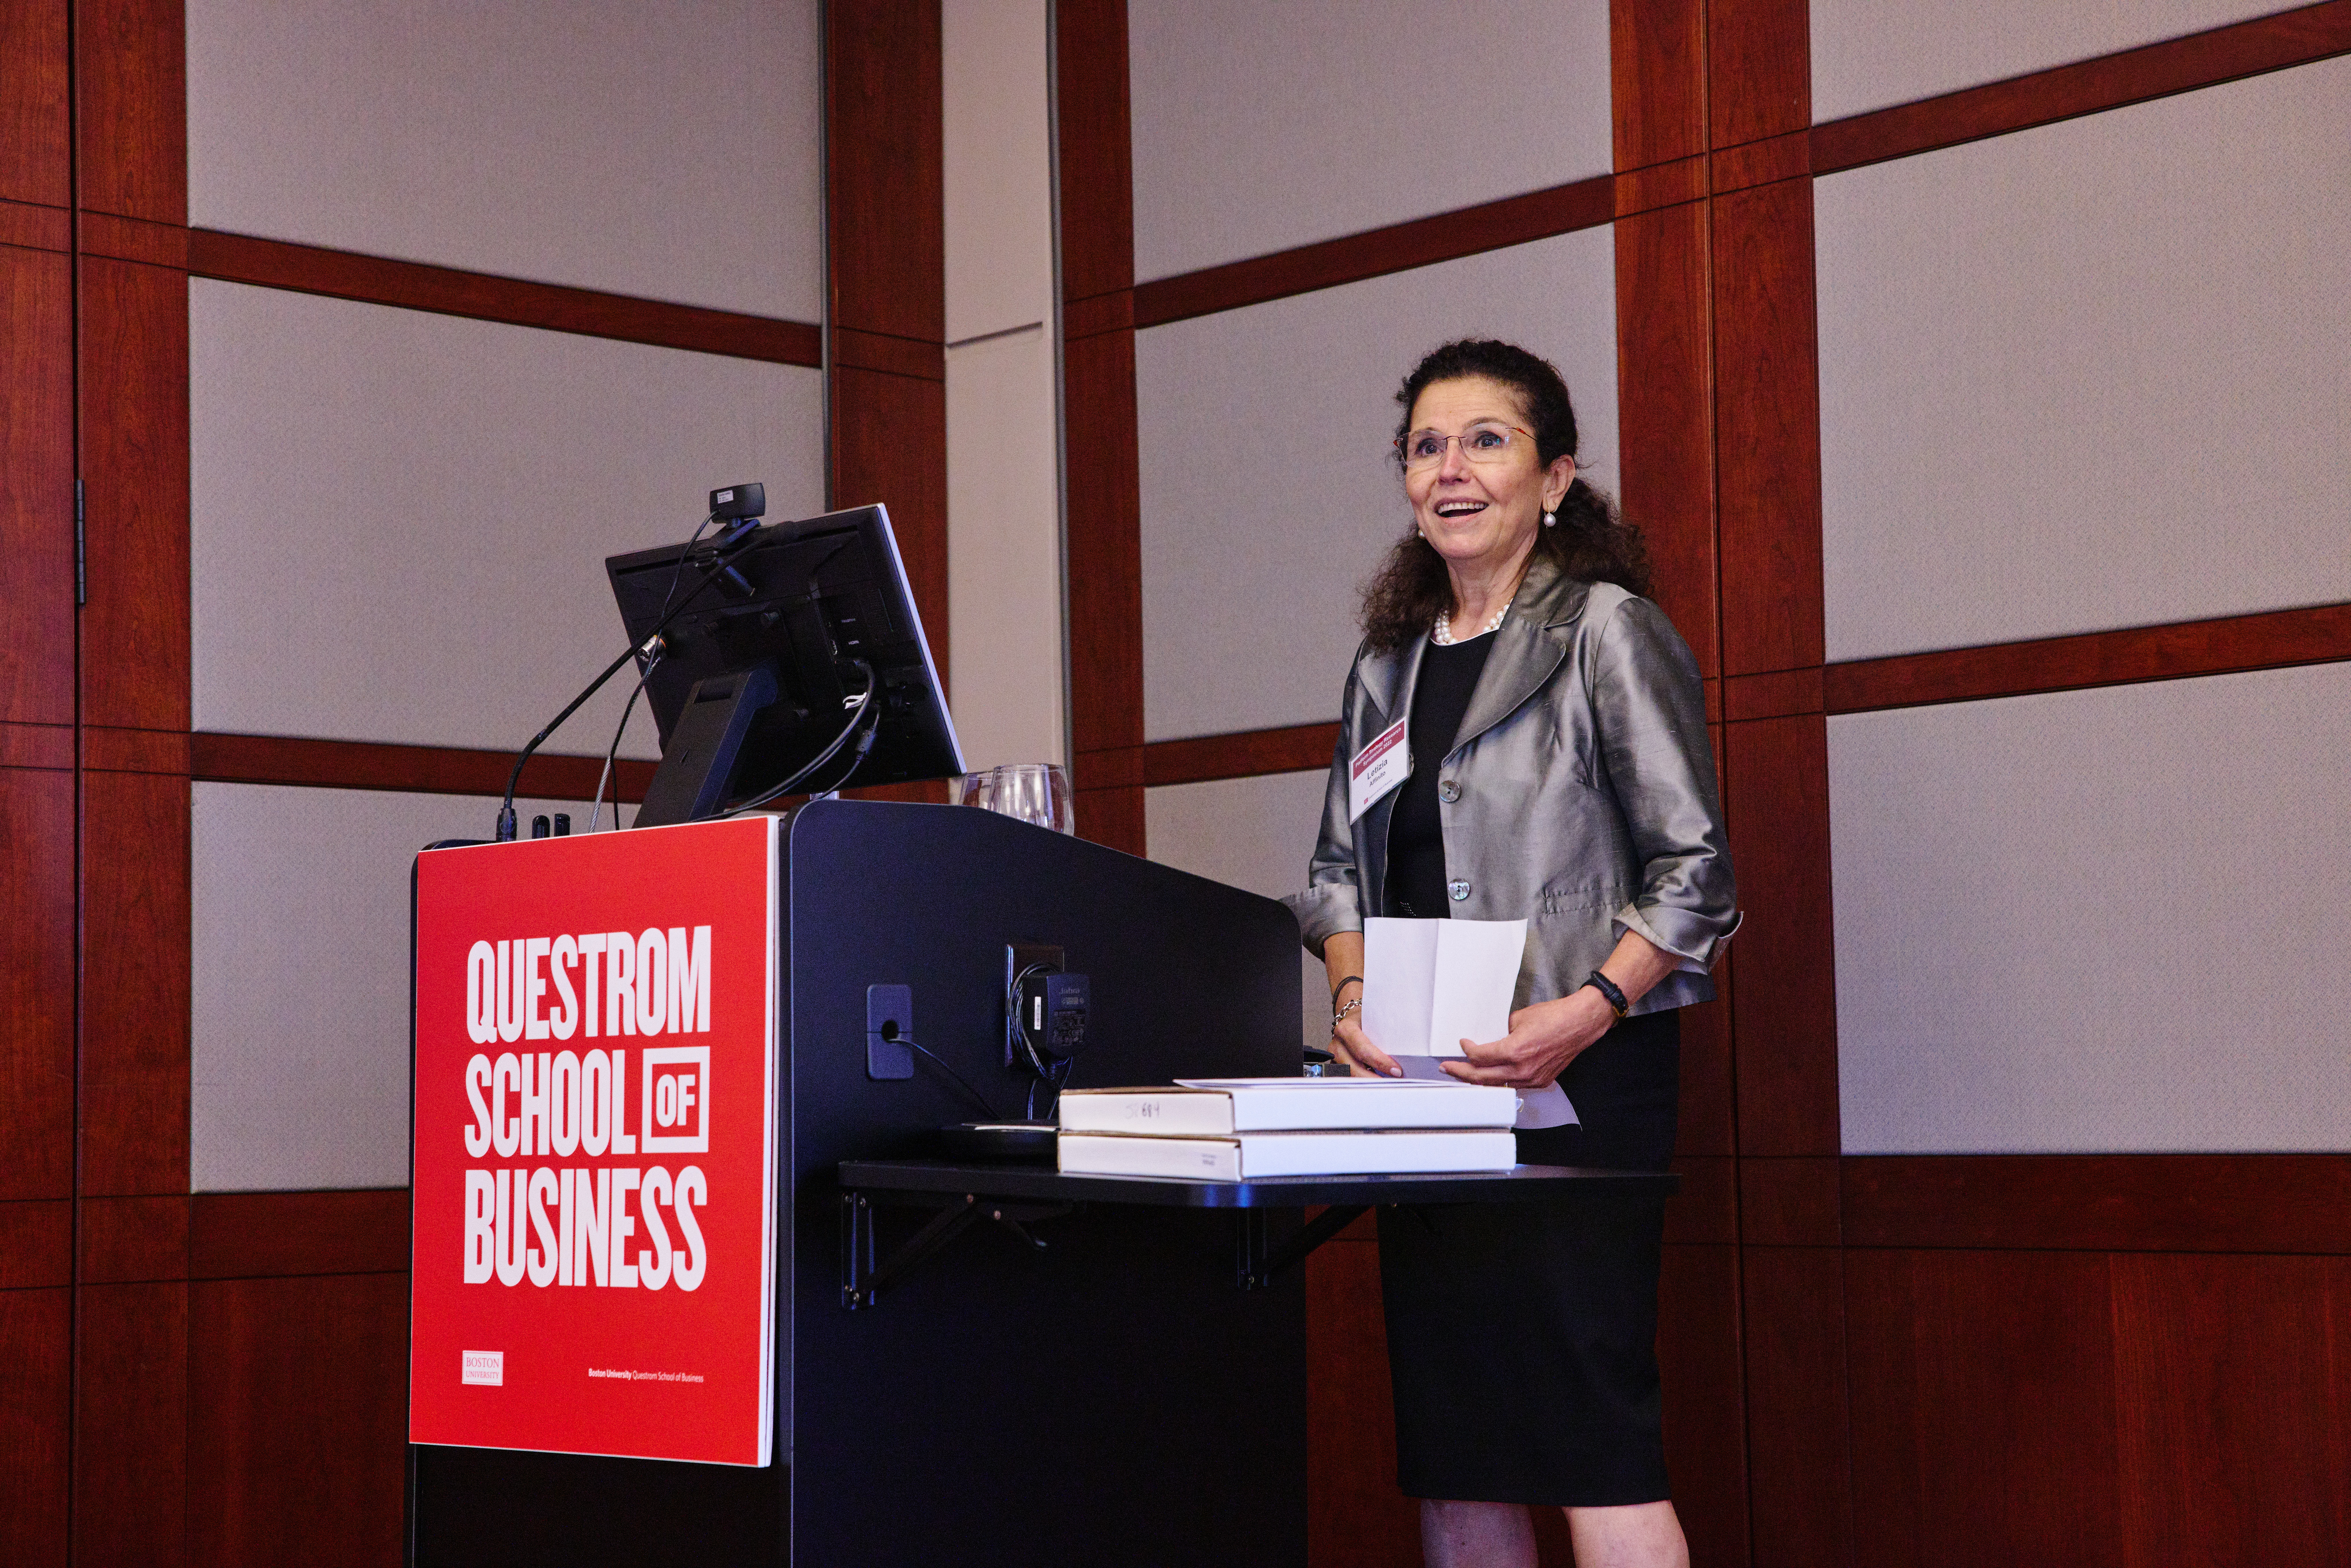 Woman with shiny grey jacket and brown curly hair smiling and presenting at the podium which has a Questrom Means Business logo on it